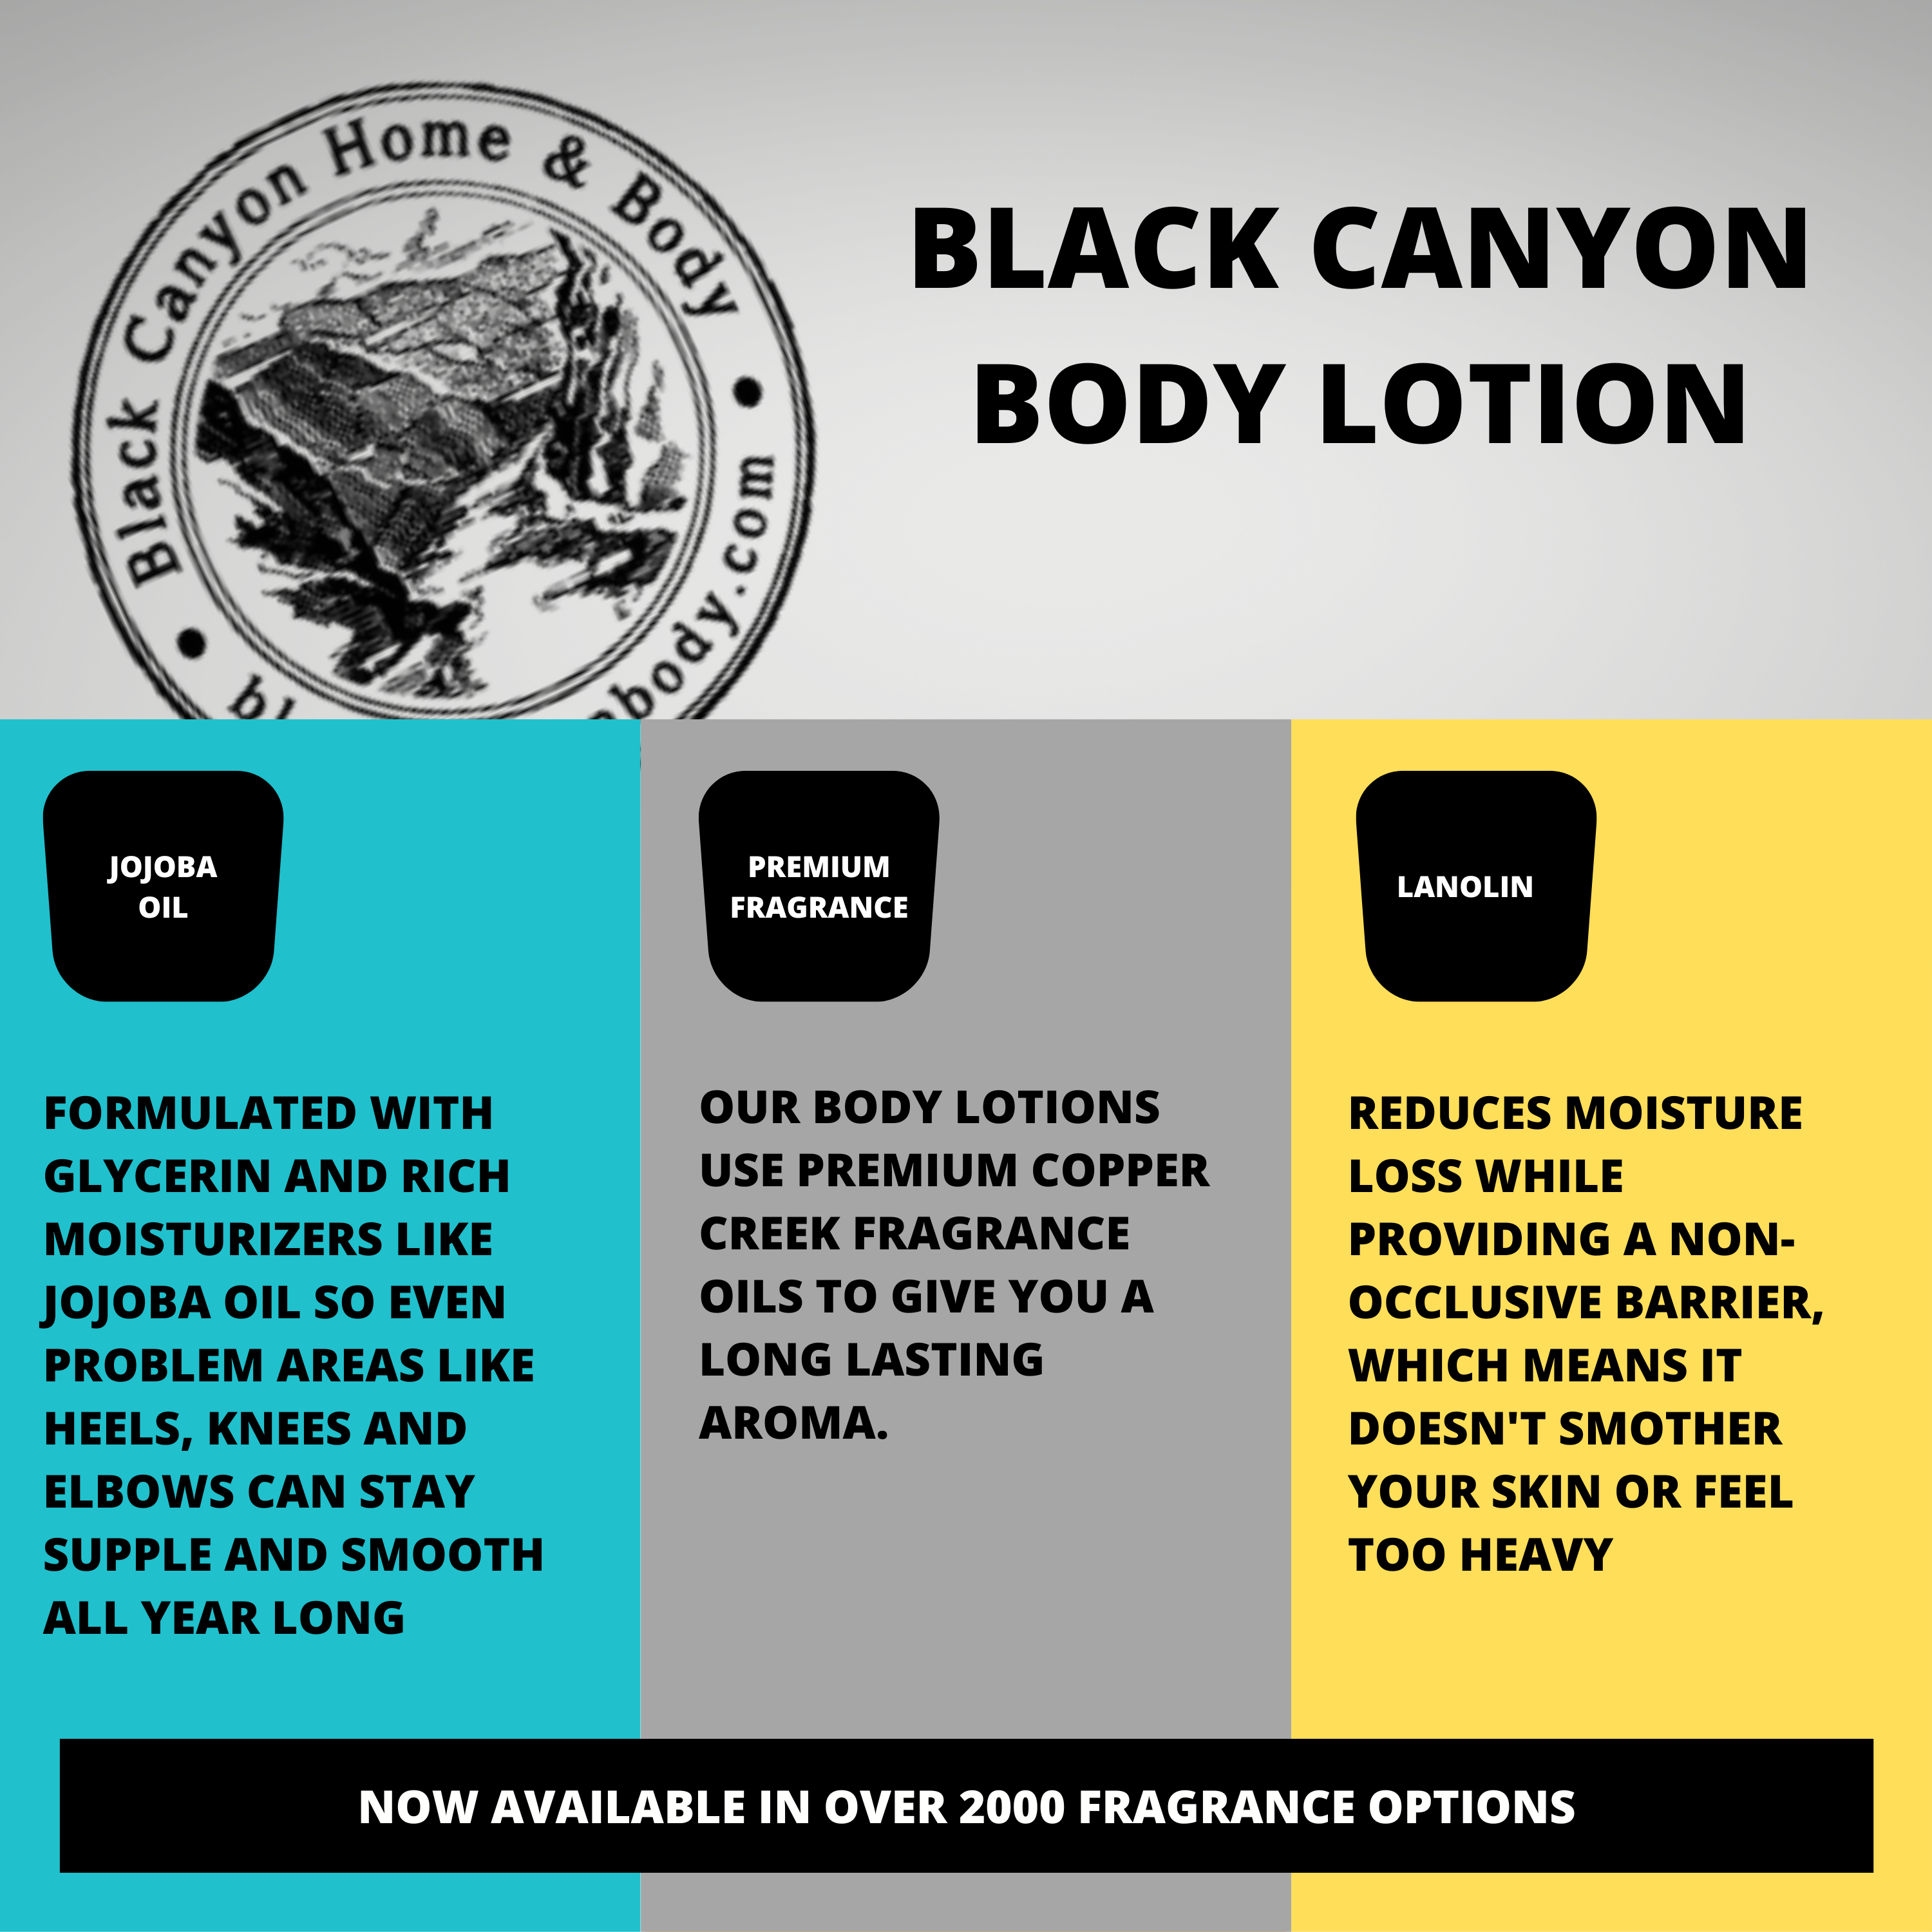 Black Canyon Apple Caramel Crunch Scented Luxury Body Lotion with Lanolin and Jojoba Oil